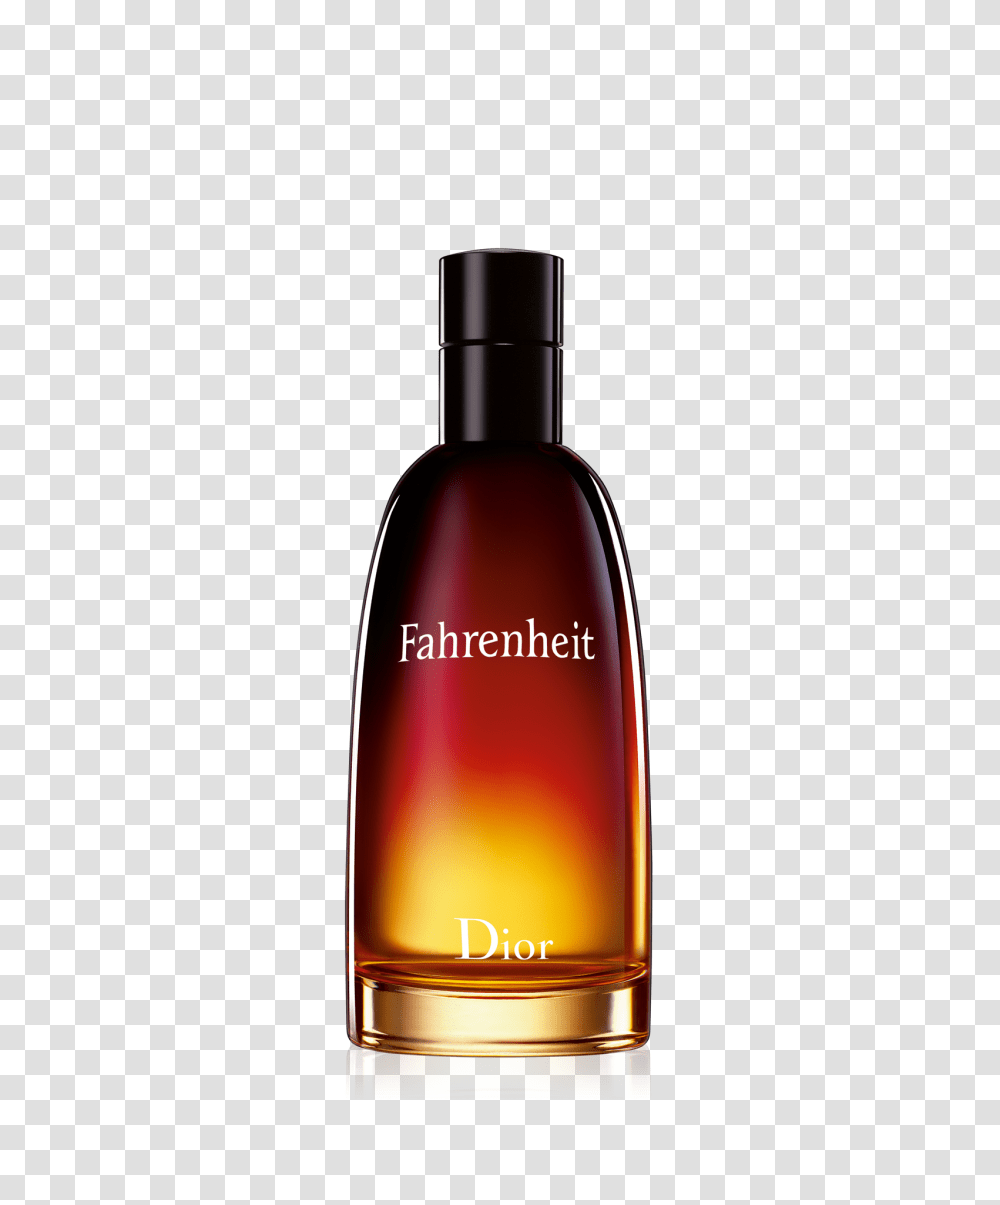 Perfume Images Free Download, Bottle, Cosmetics, Label Transparent Png